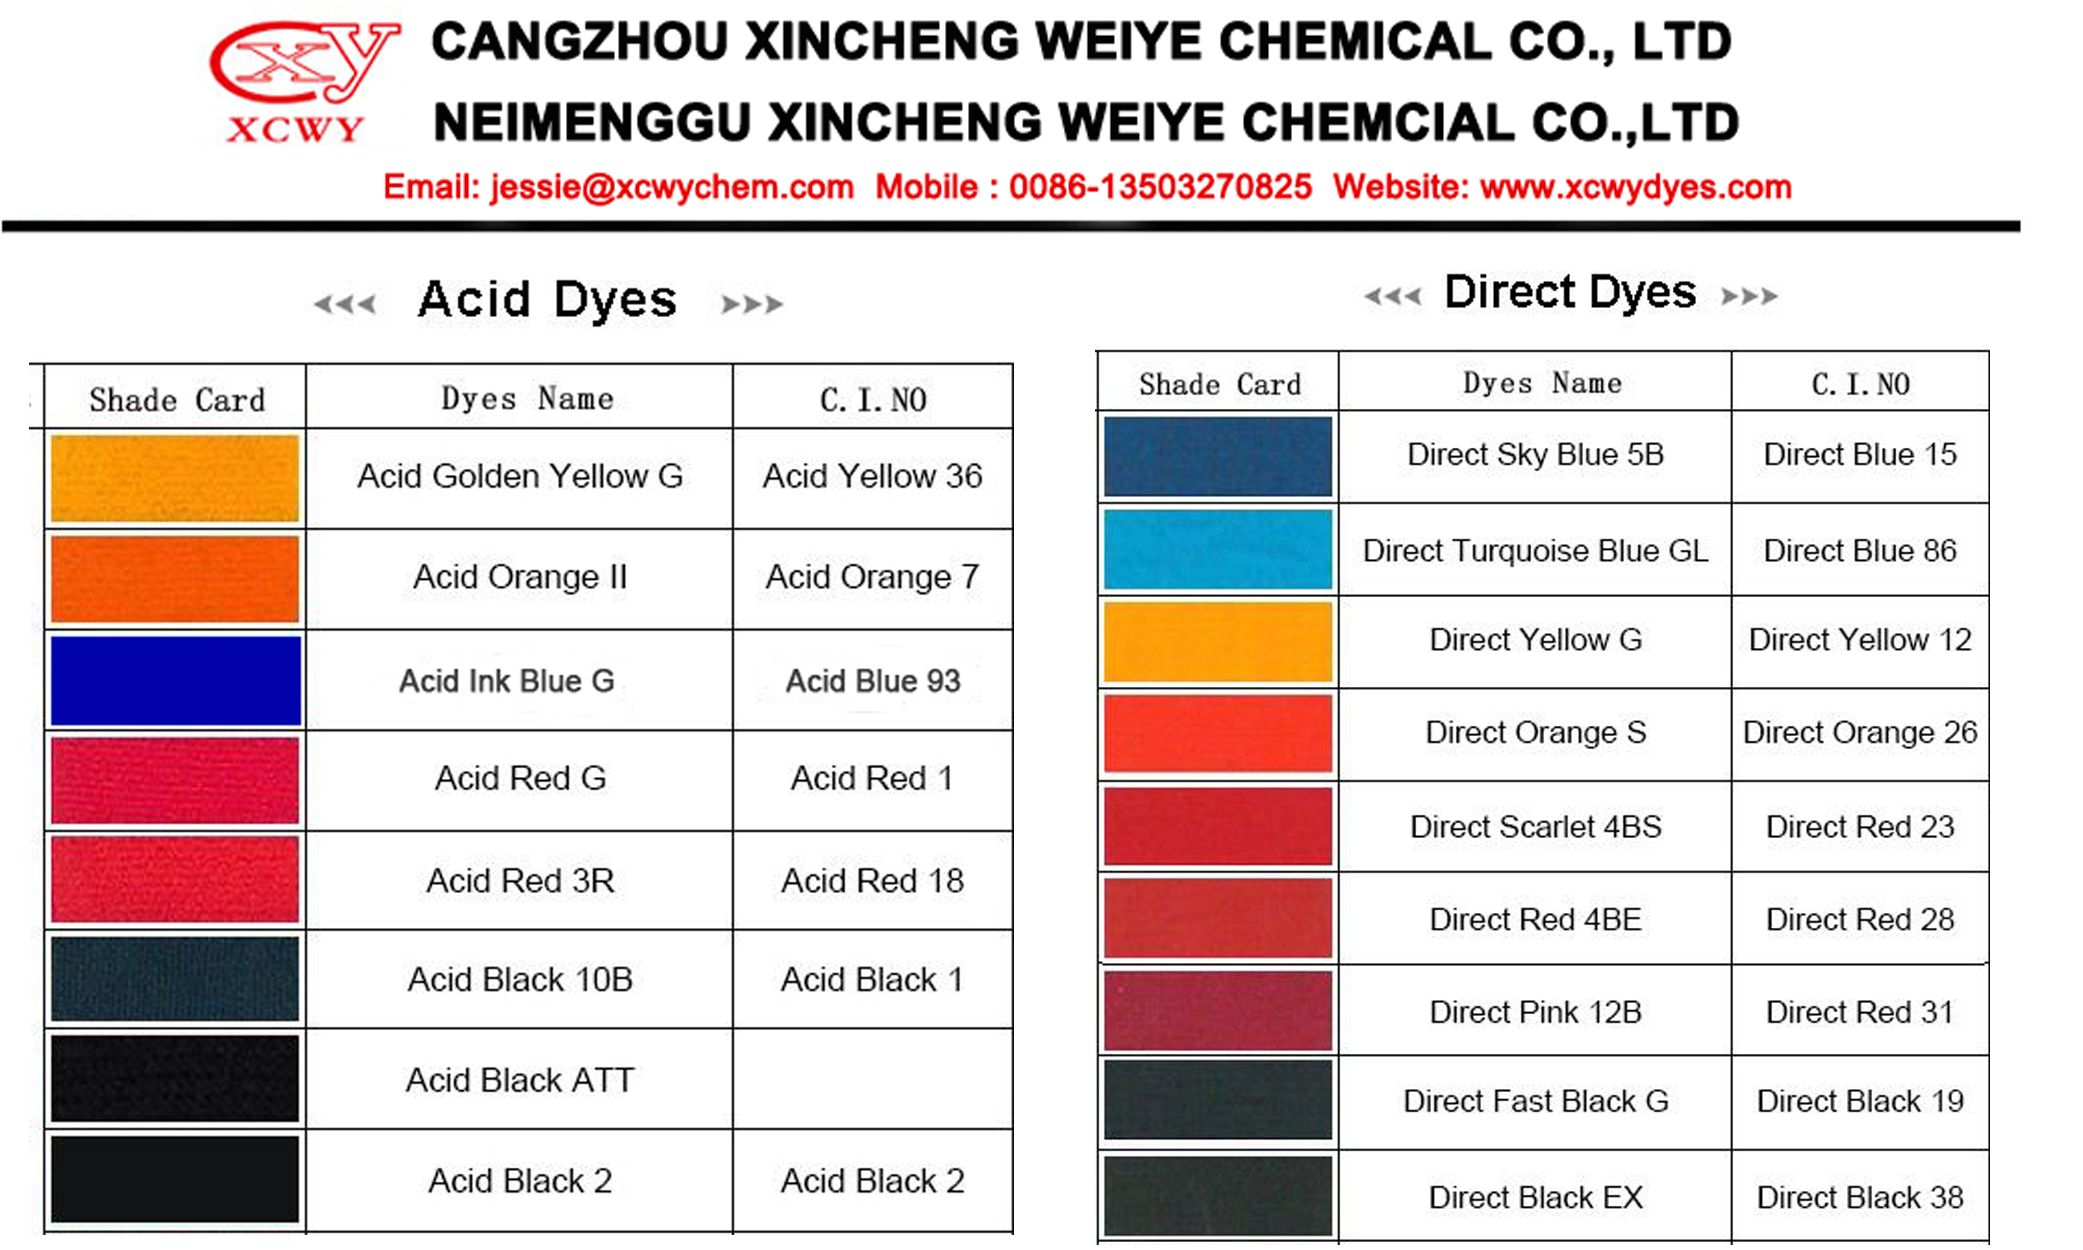 http://www.xcwydyes.com/products/acid-dyes/